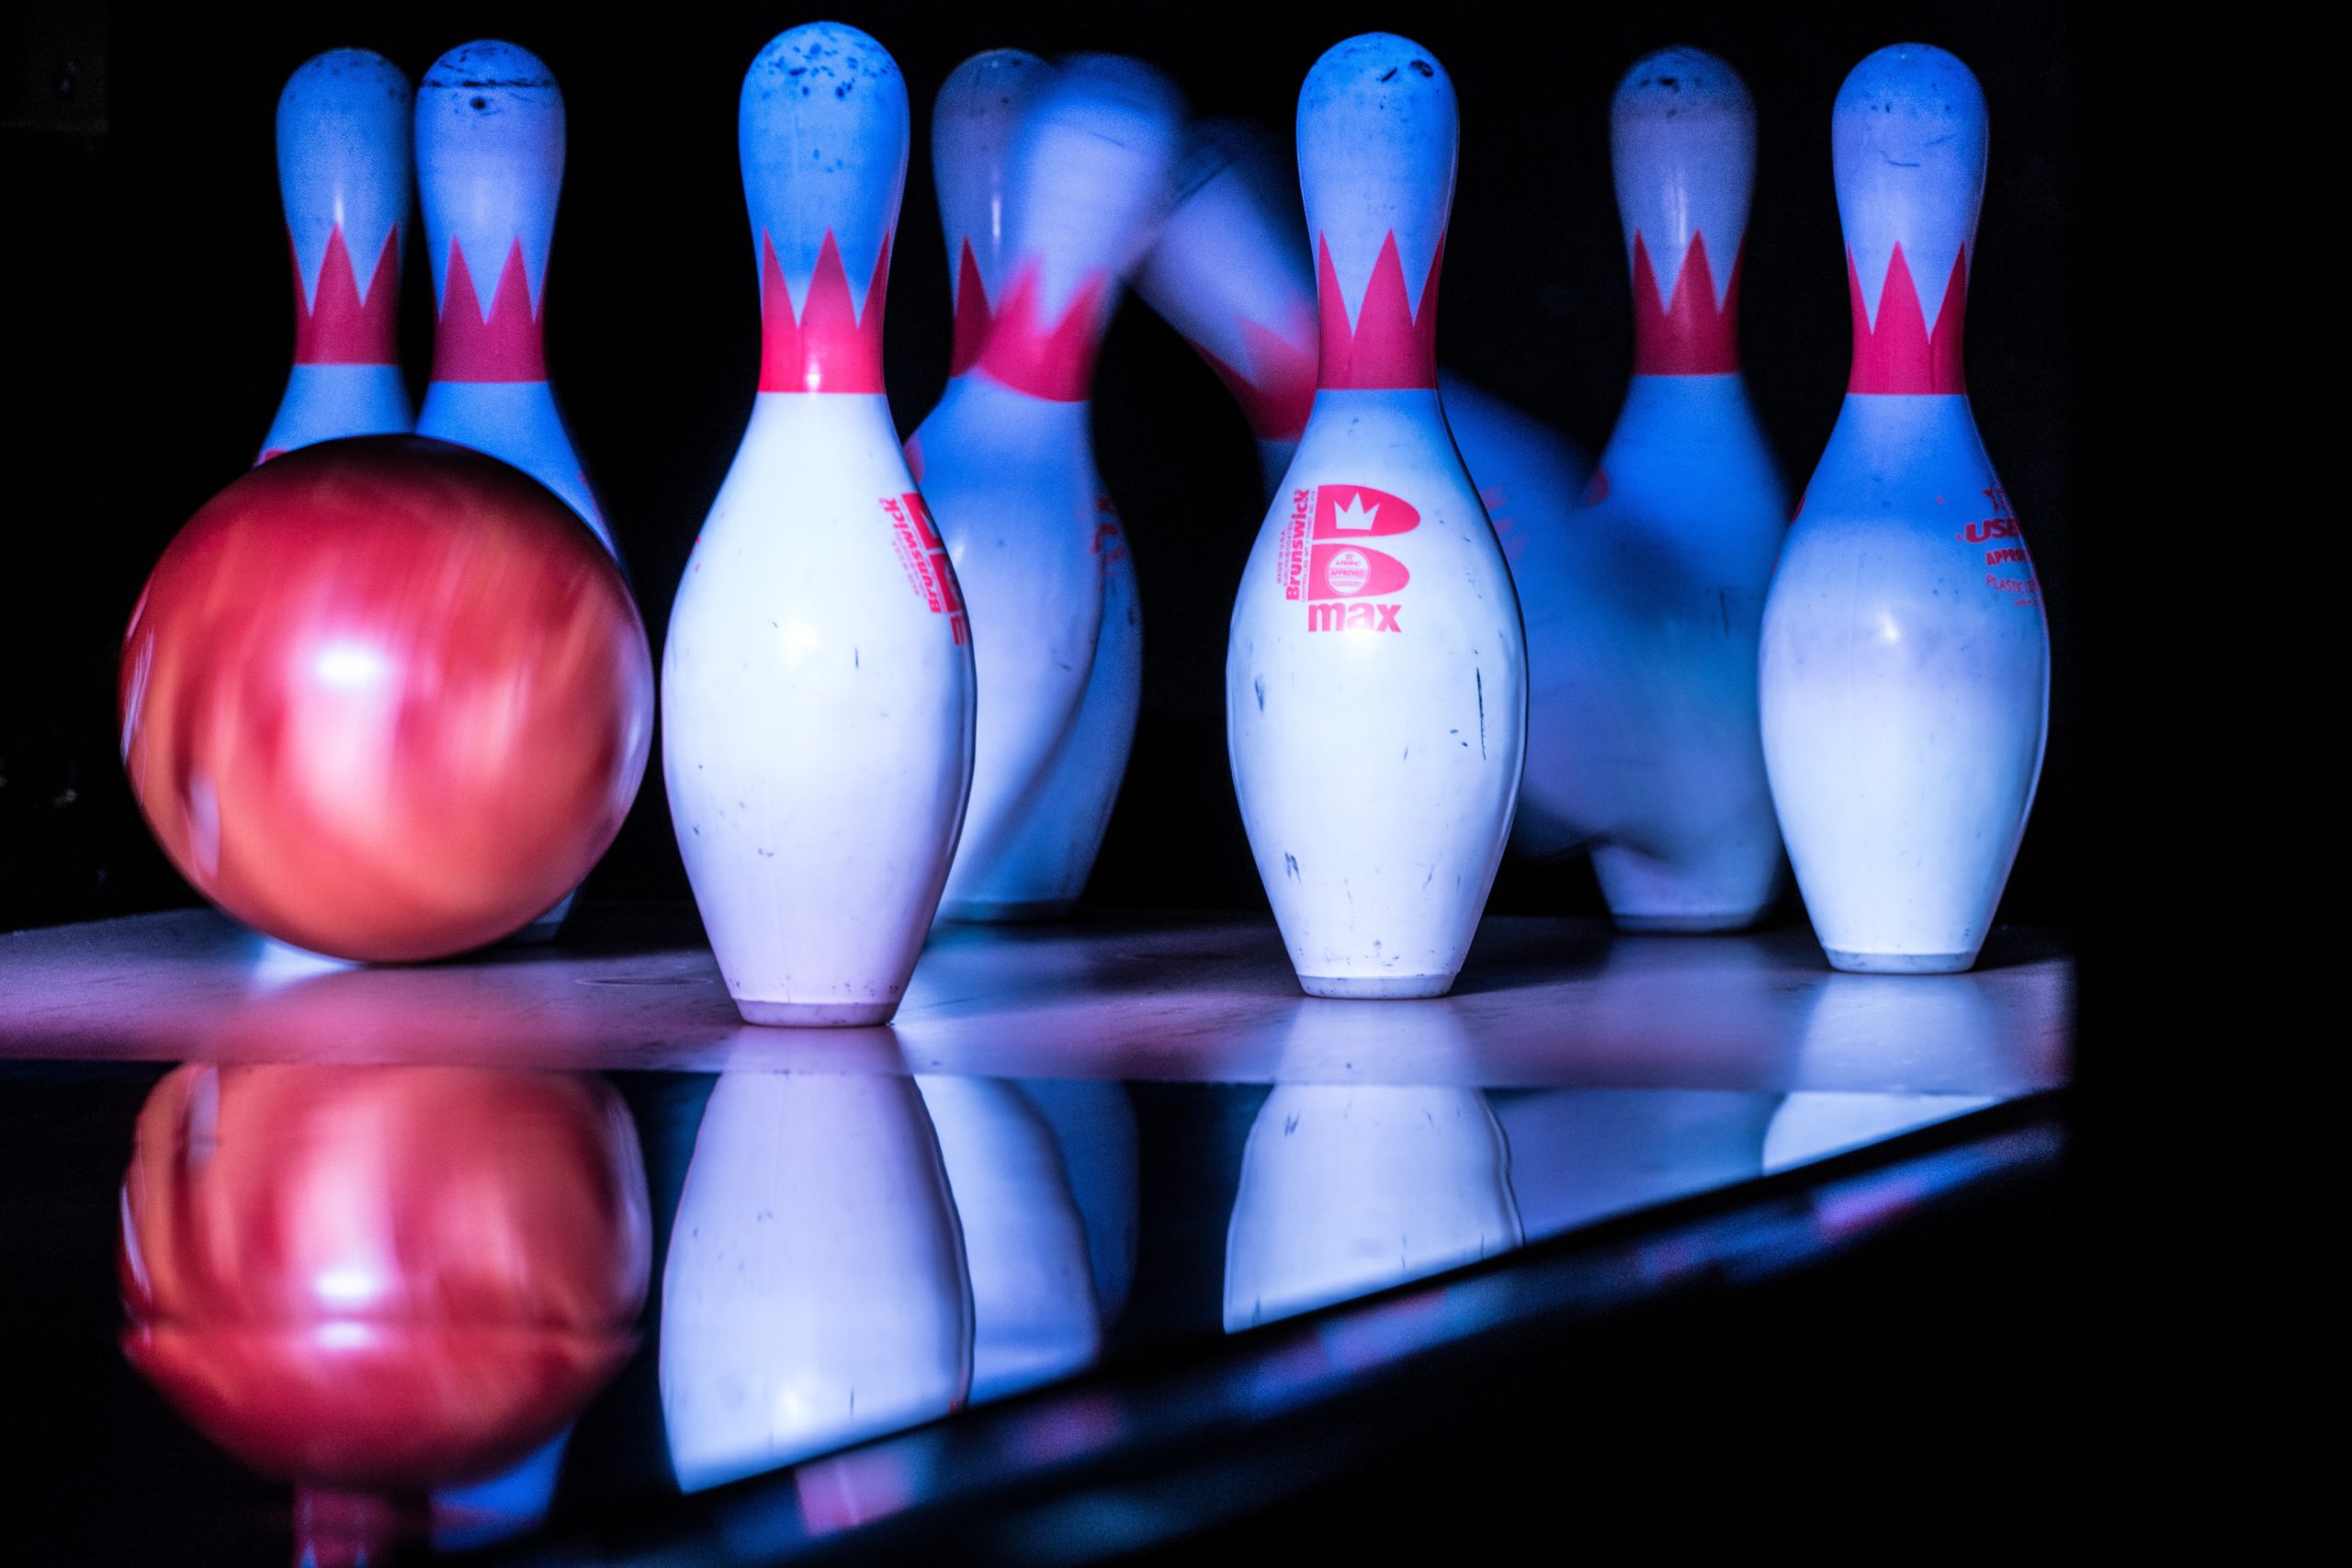 20 Top Things to Do in Plano - Pinstack bowling